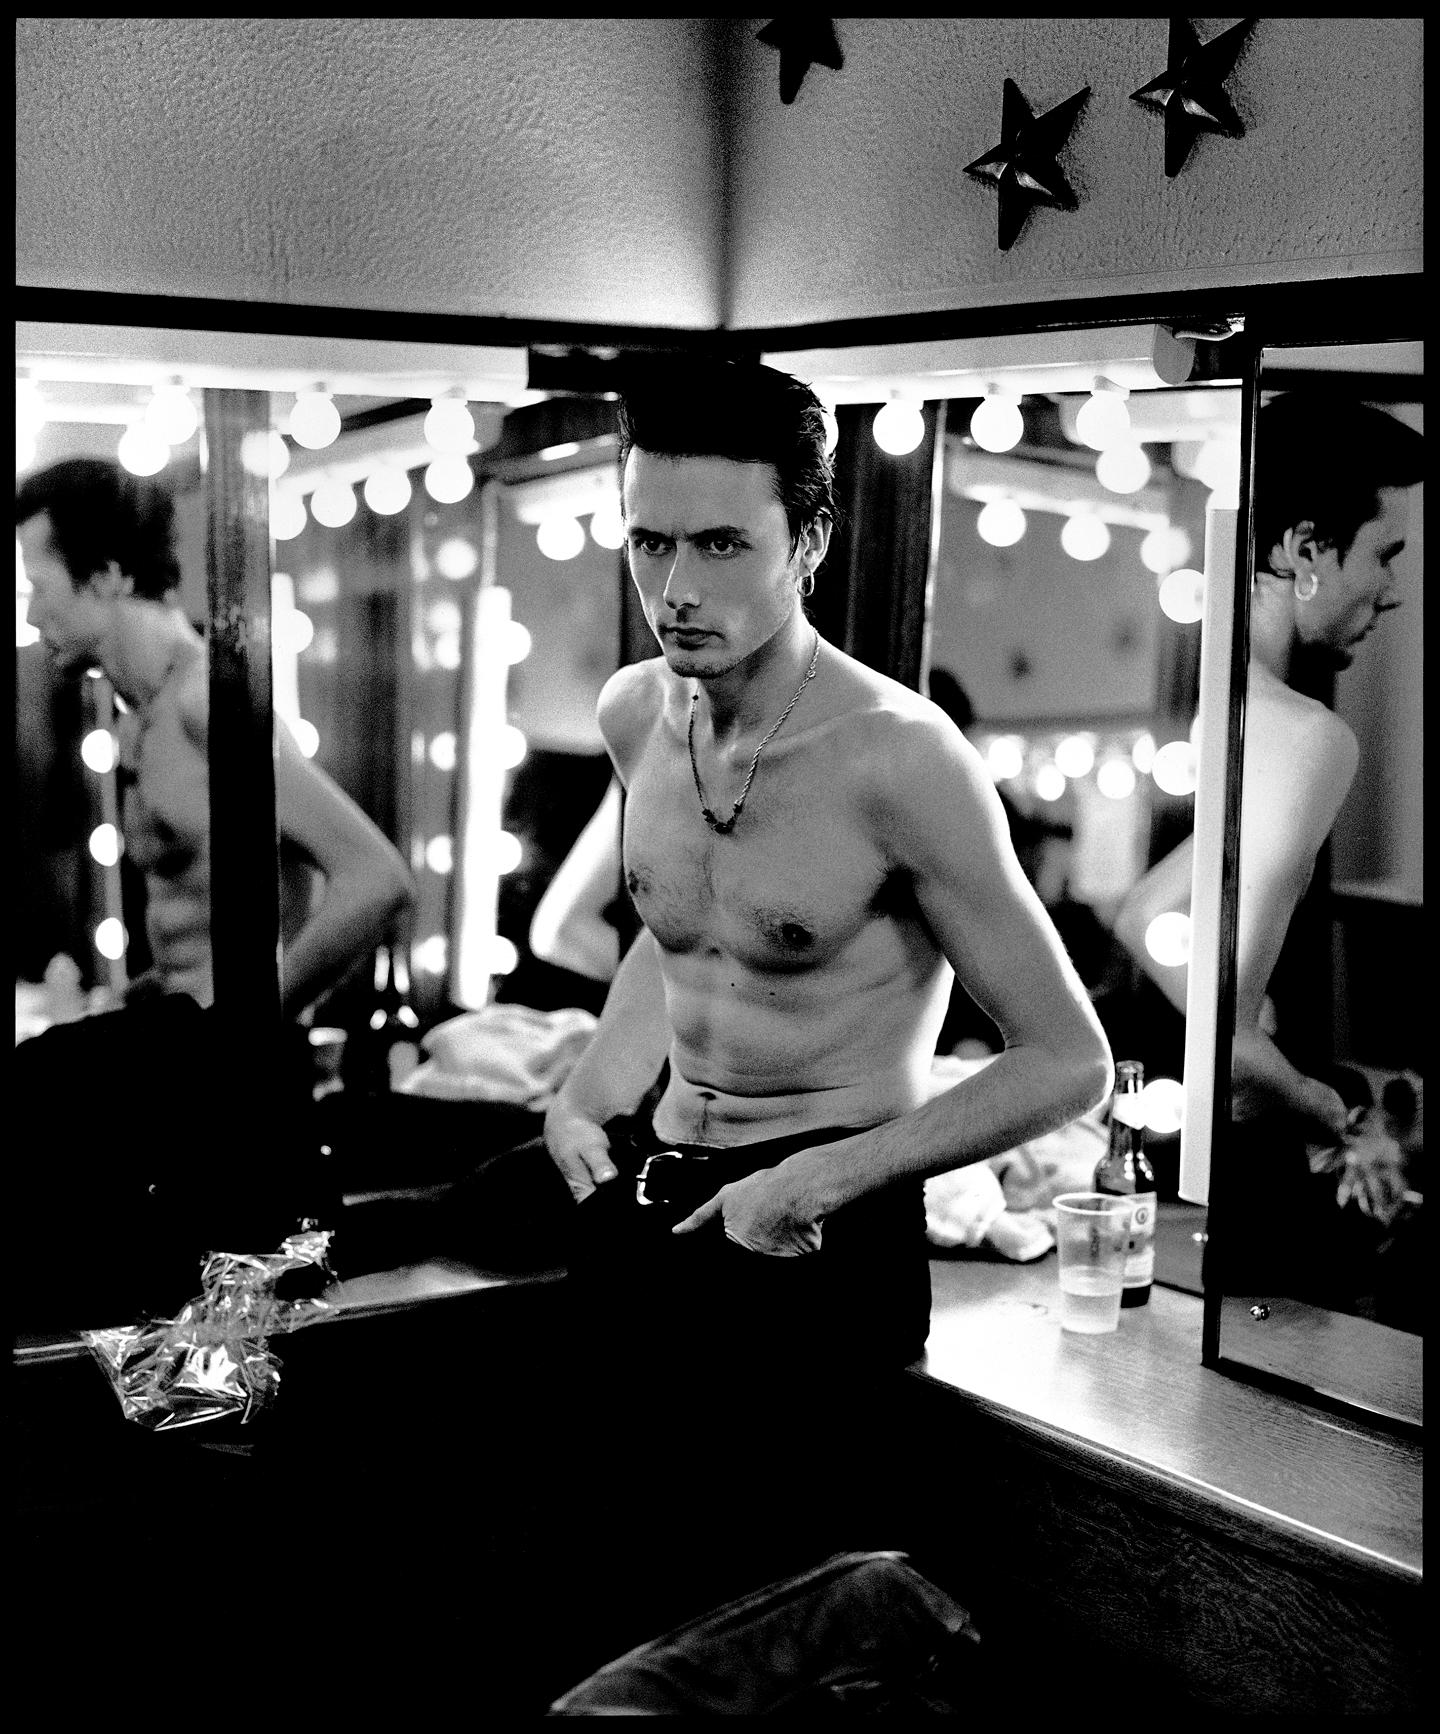 Brett Anderson

Brett in the dressing room, Suede.

2022

by Kevin Westenberg
Signed Limited Edition

Kevin Westenberg is famed for his creation of provocative and electrifying images of world-class musicians, artists and movie stars for over 25